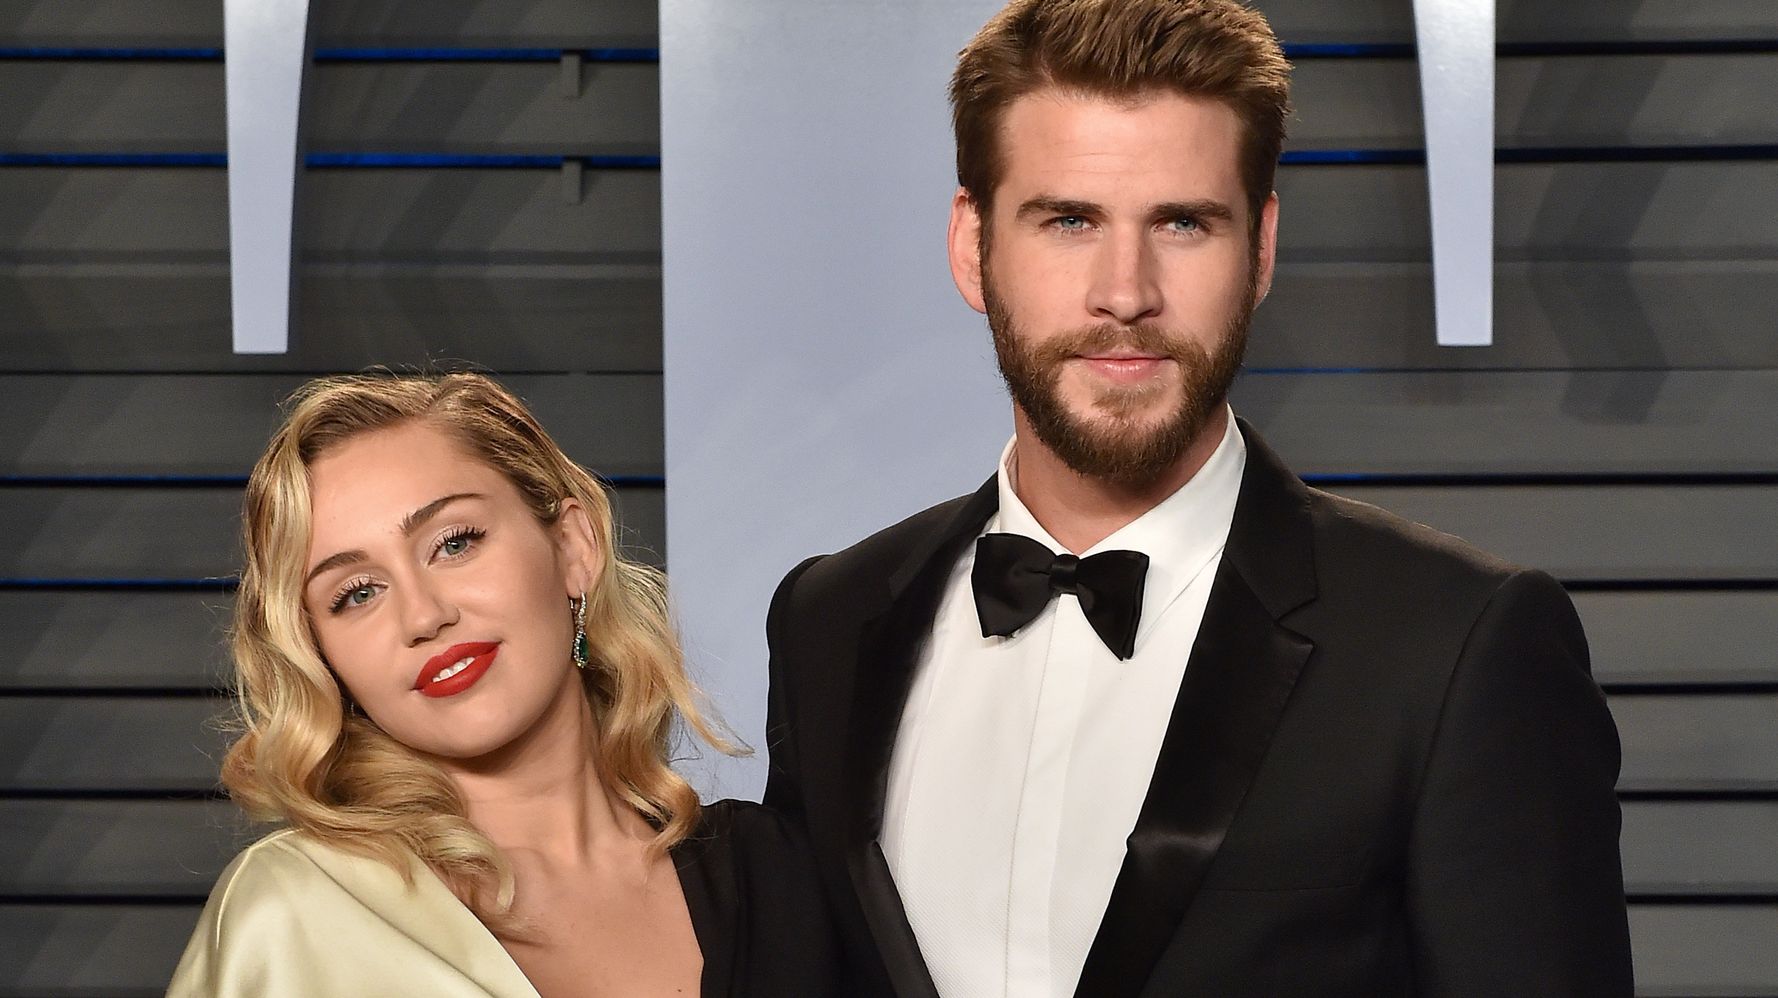 Miley Cyrus And Liam Hemsworth Look Very Married In New Instagram 1135